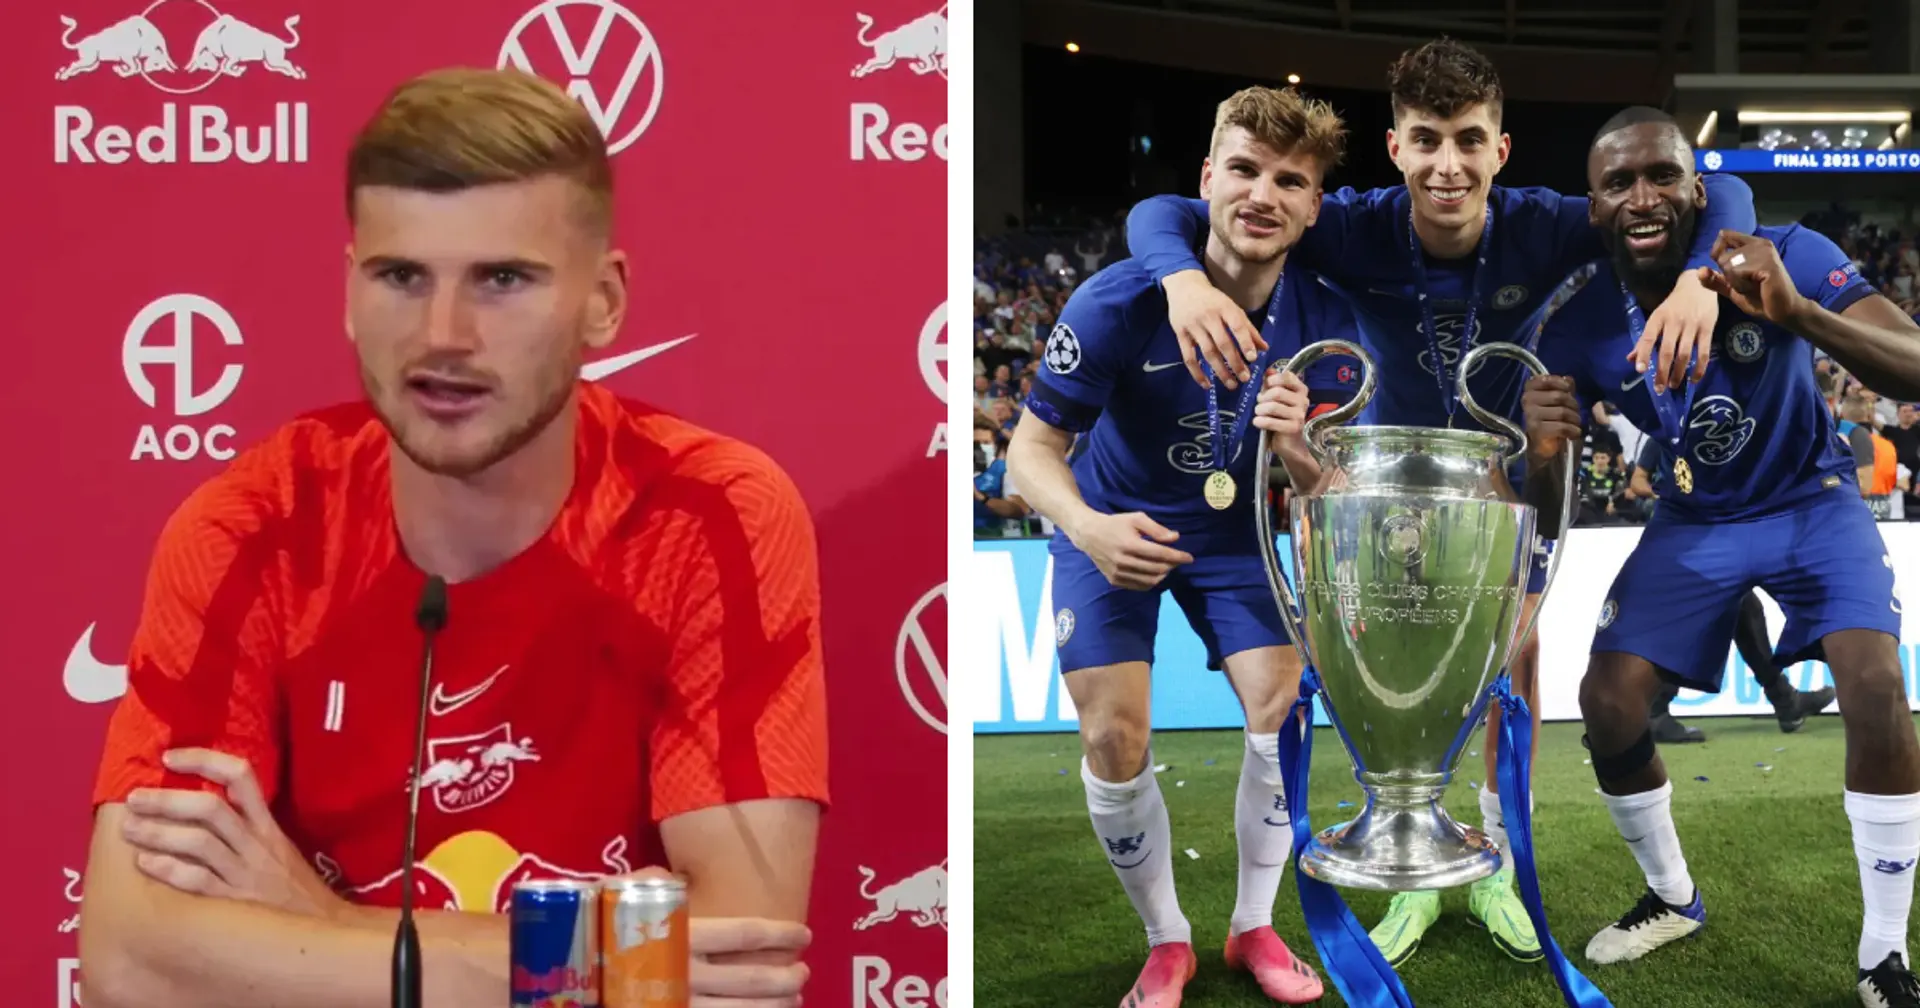 'It will always be a special club for me': Werner looks back at Chelsea period of his career